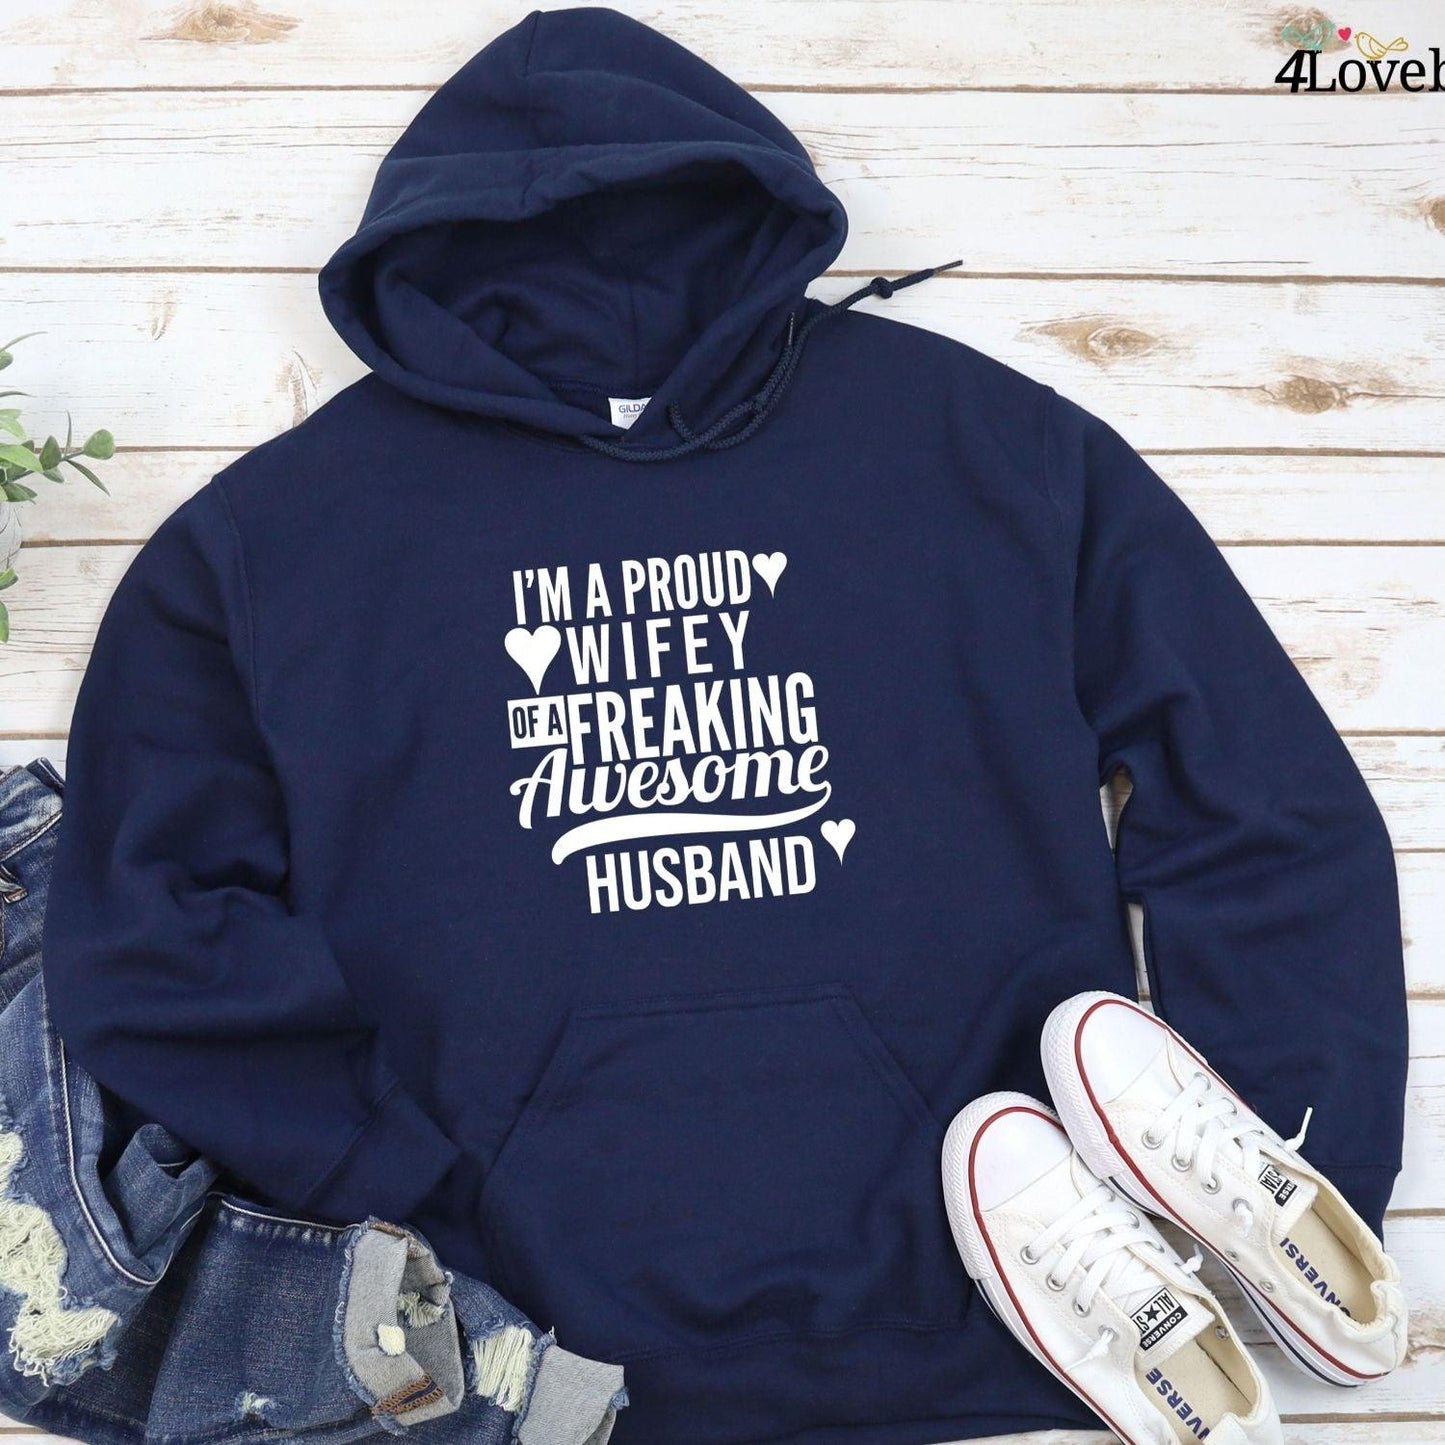 Proud Husband & Wifey Matching Outfits Set - Perfect Couple's Gift - 4Lovebirds